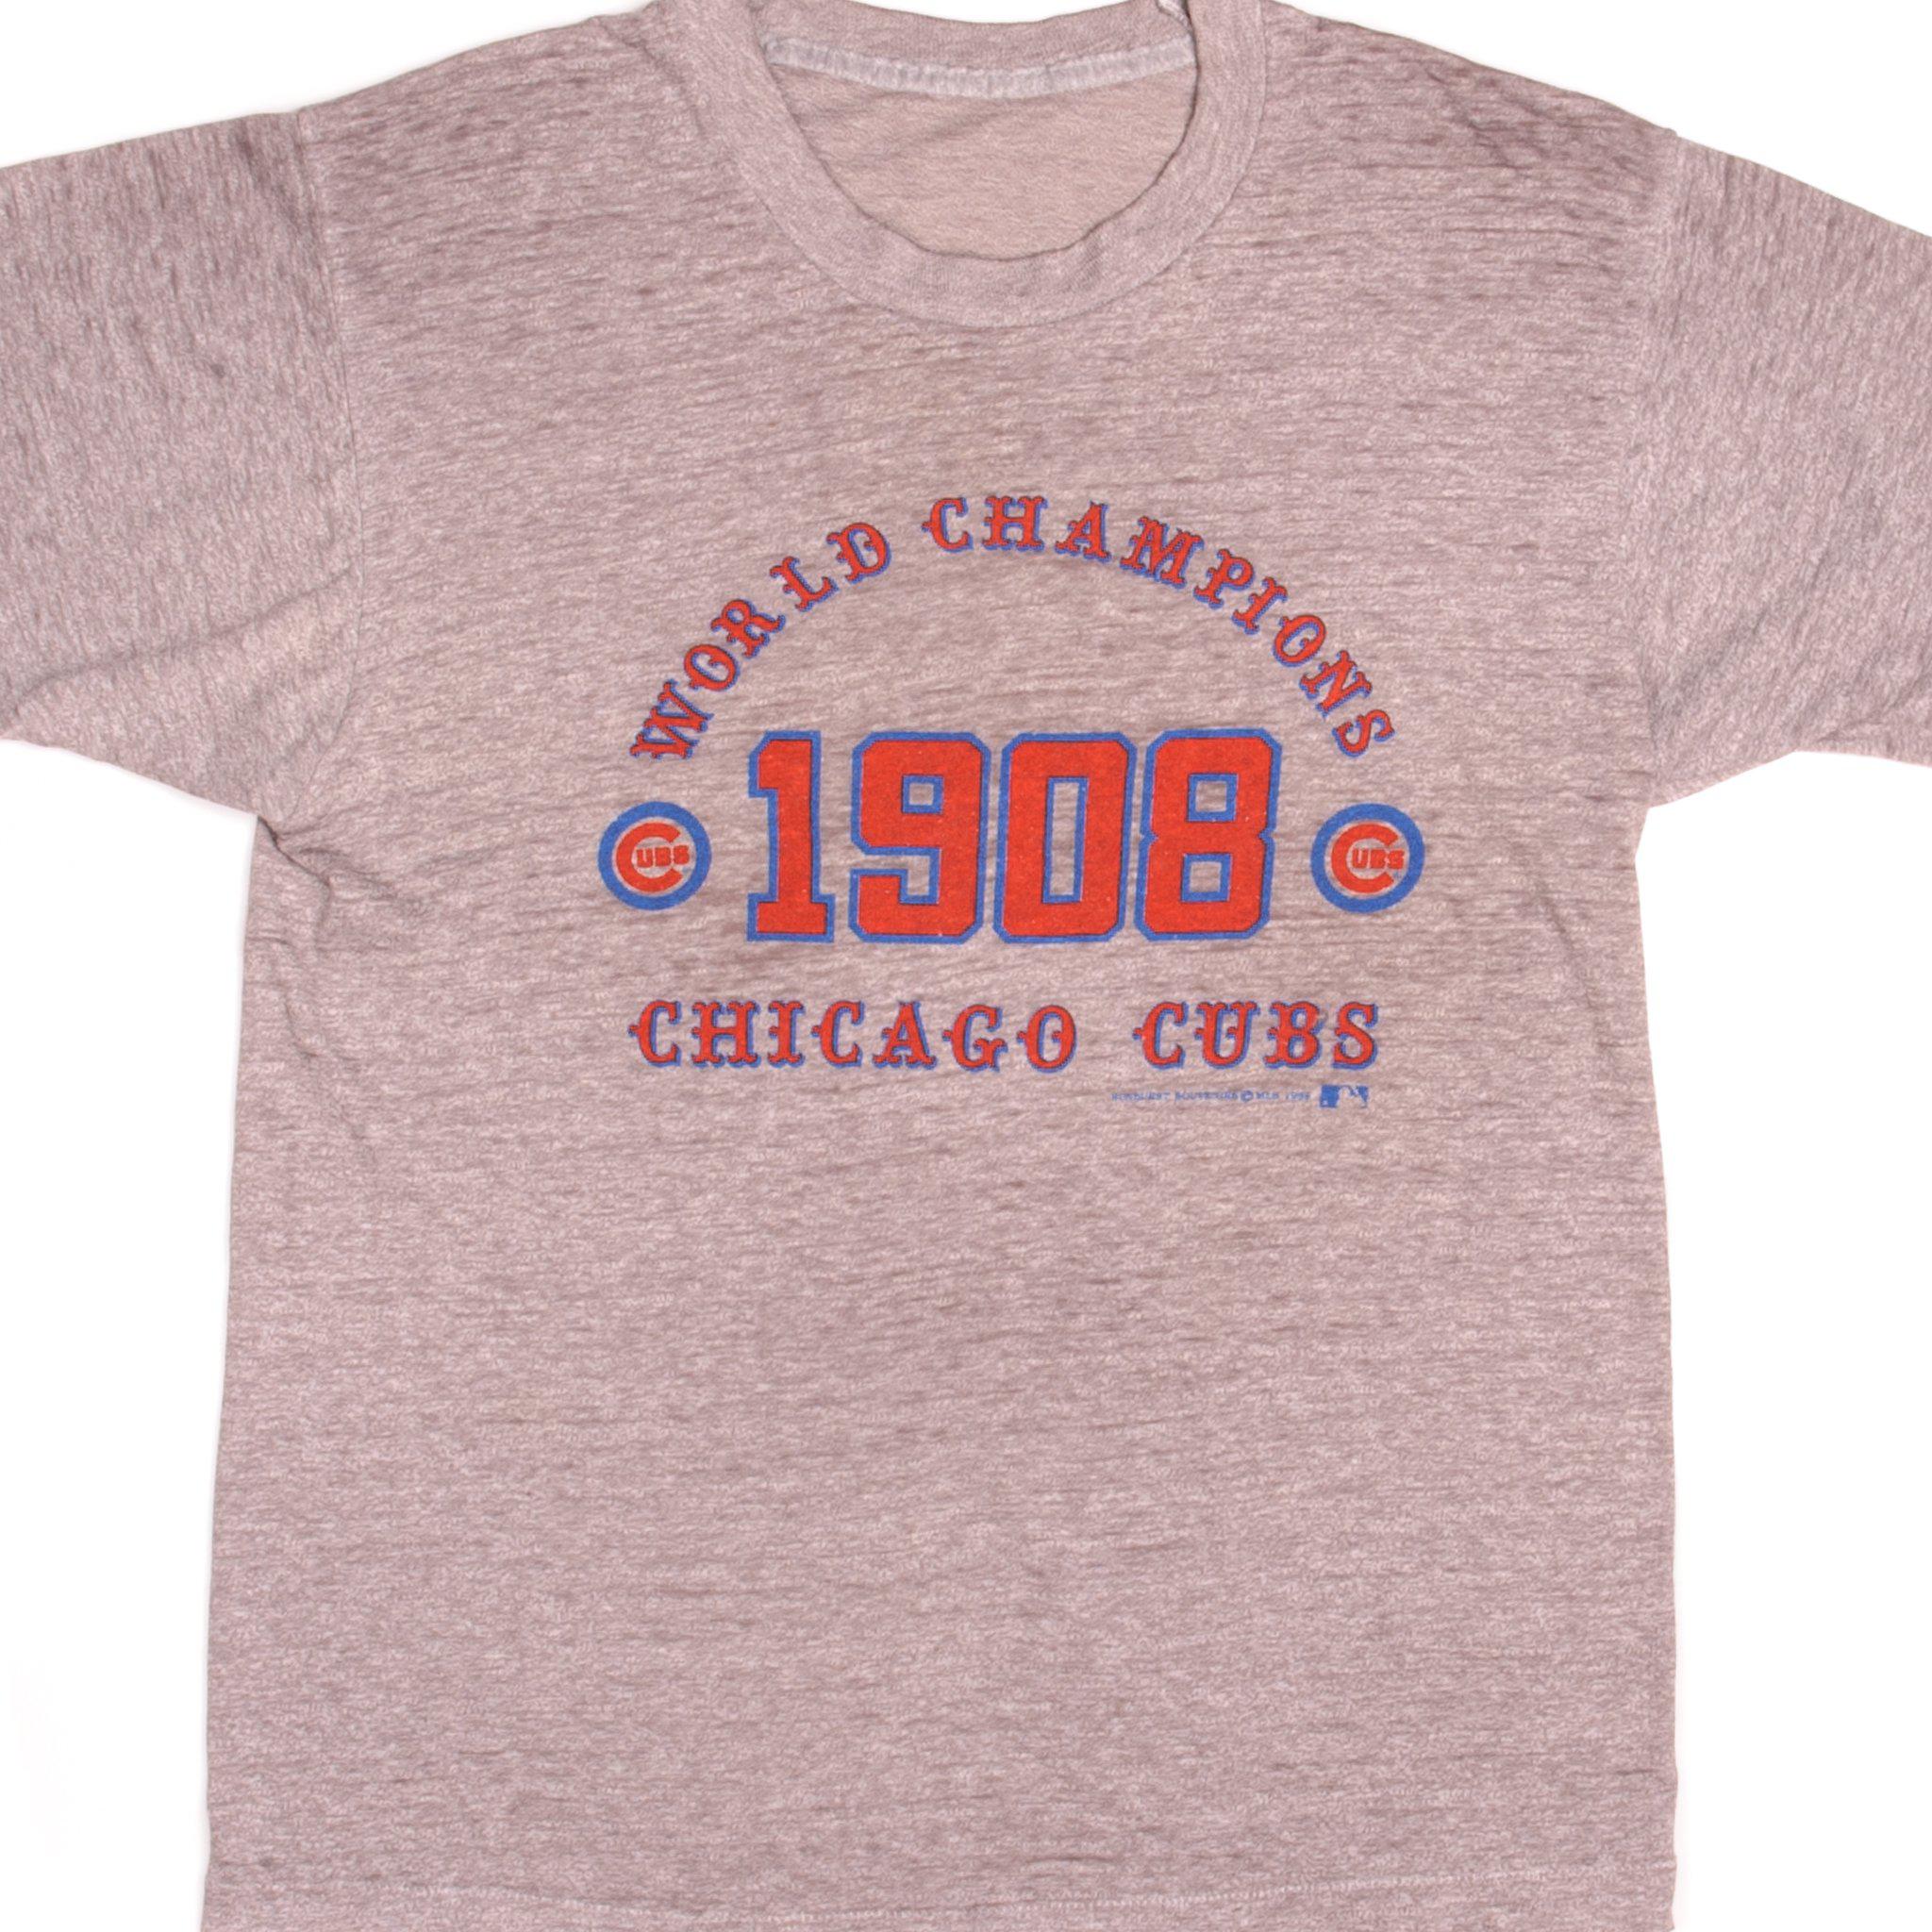 VINTAGE - 1998 - SINGLE STICH - Chicago Cubs - Wrigley Field - T Shirt -  Large